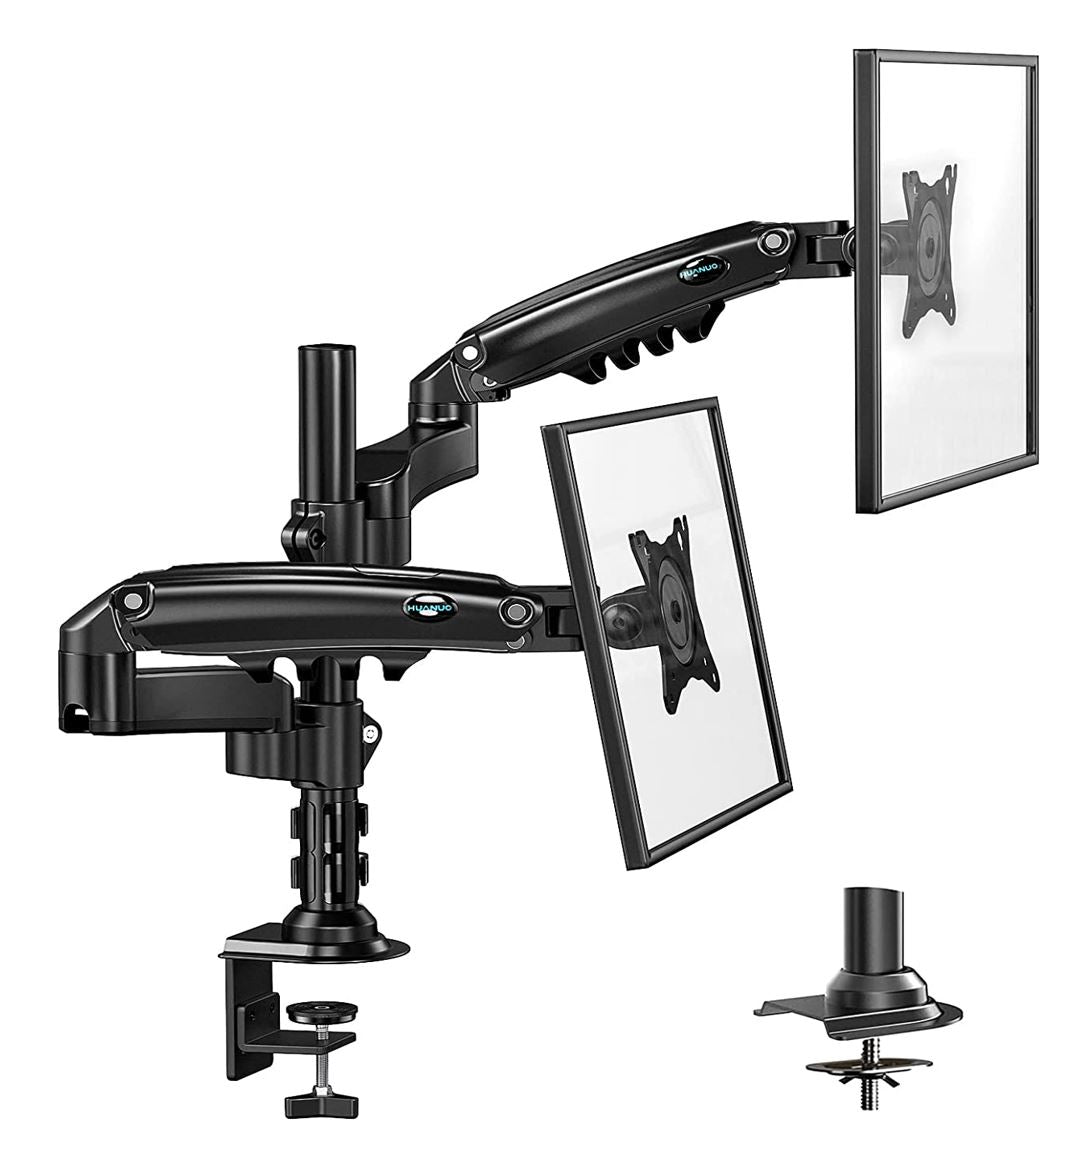 Dual Monitor Stand - Height Adjustable Gas Spring Double Arm Monitor Mount Desk Stand Fits Two 17 to 32 inch Screens with Clamp, Grommet Mounting Base, Each Arm Holds up to 19.8lbs